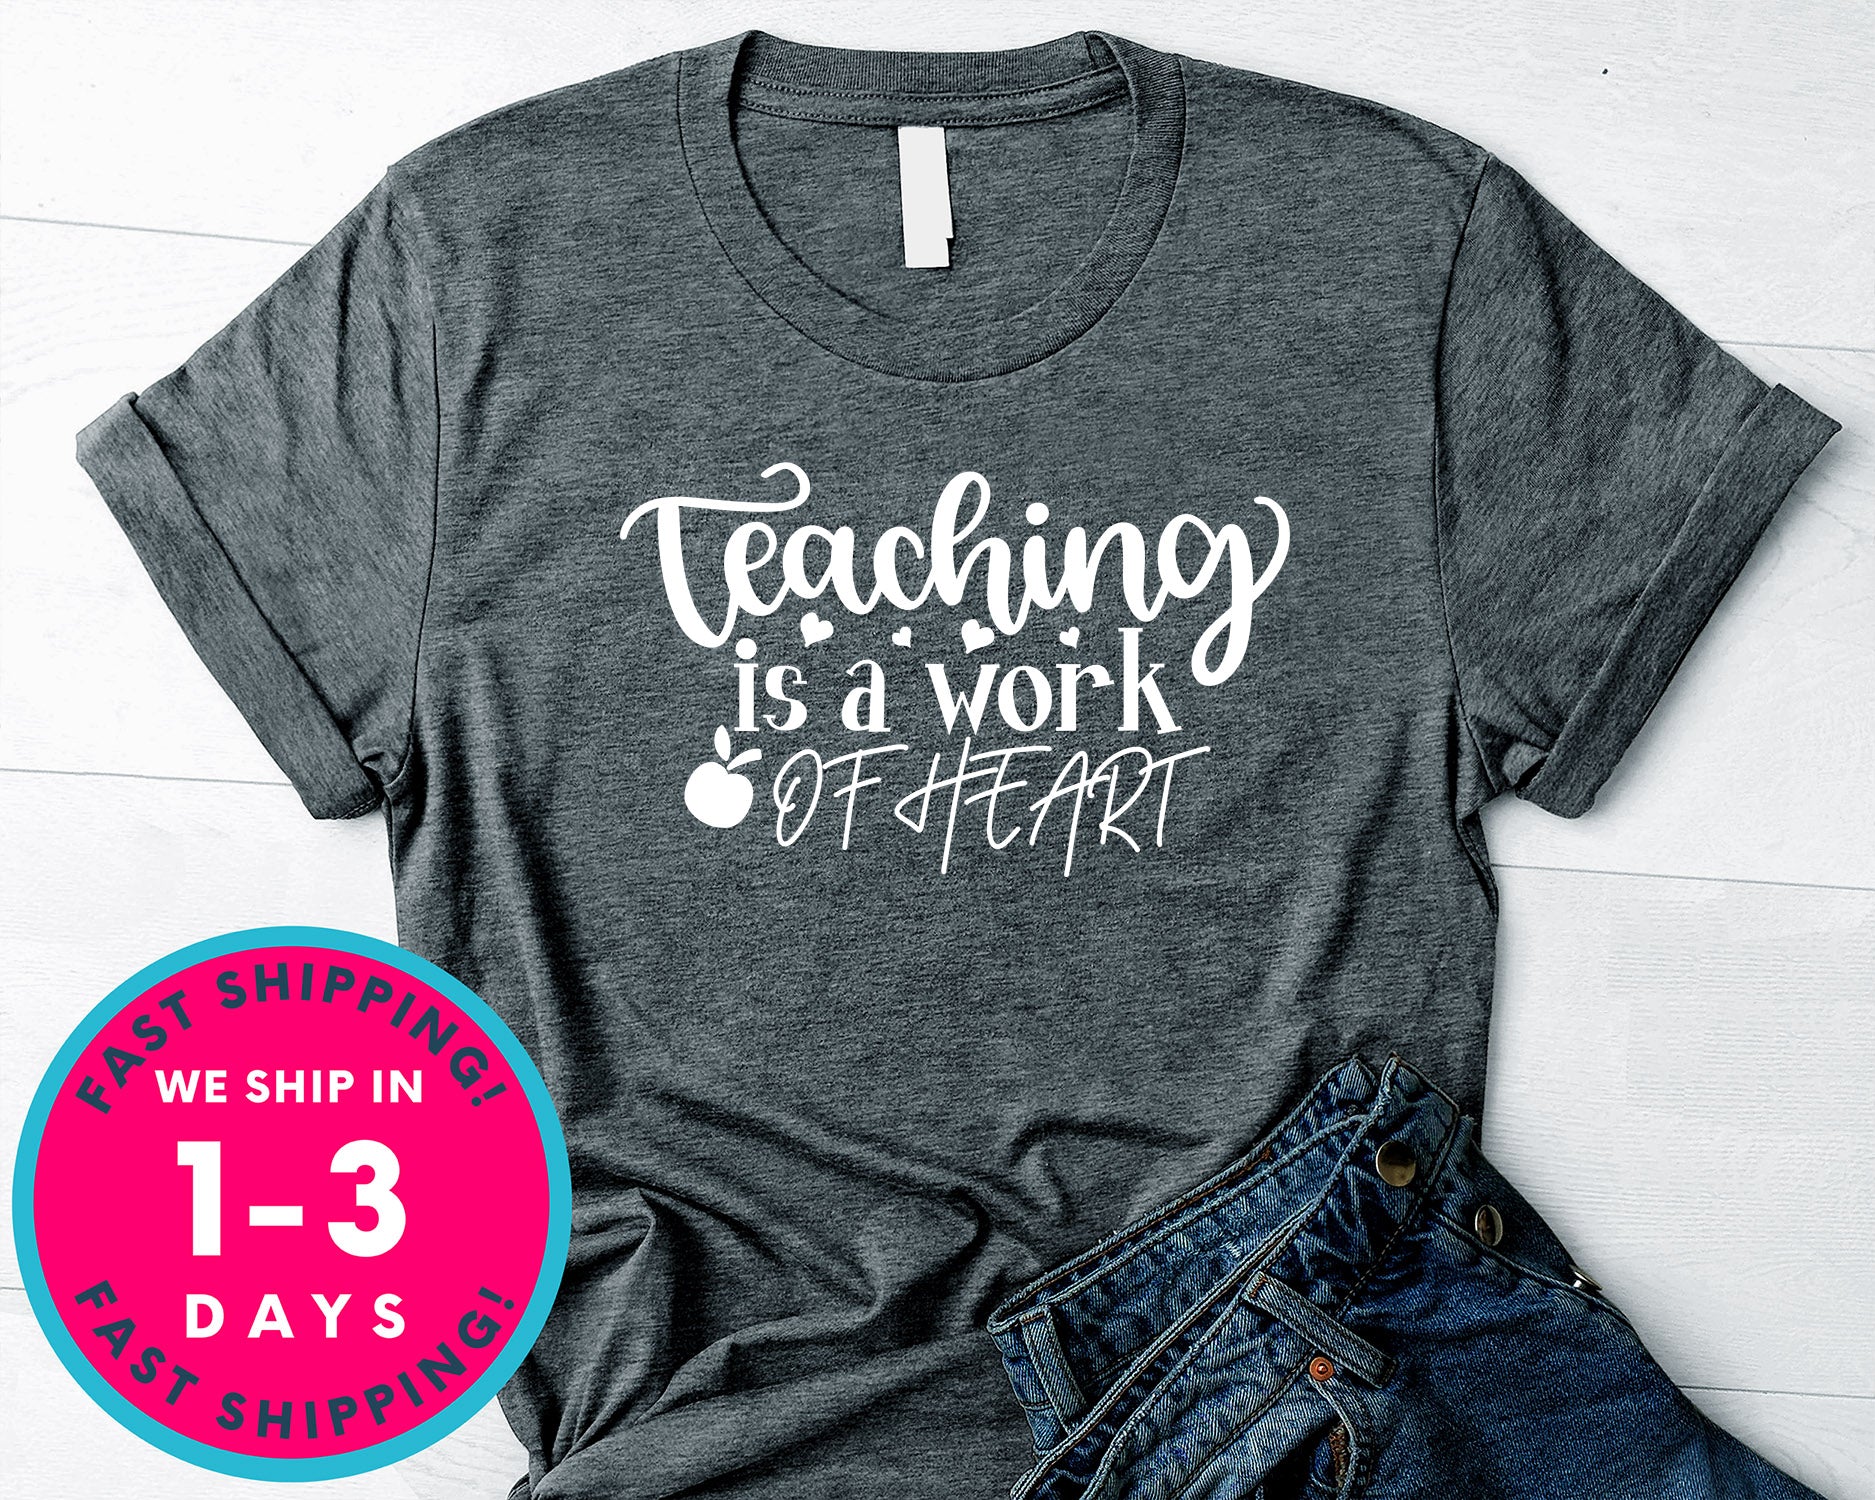 Teaching Is A Work Of Heart